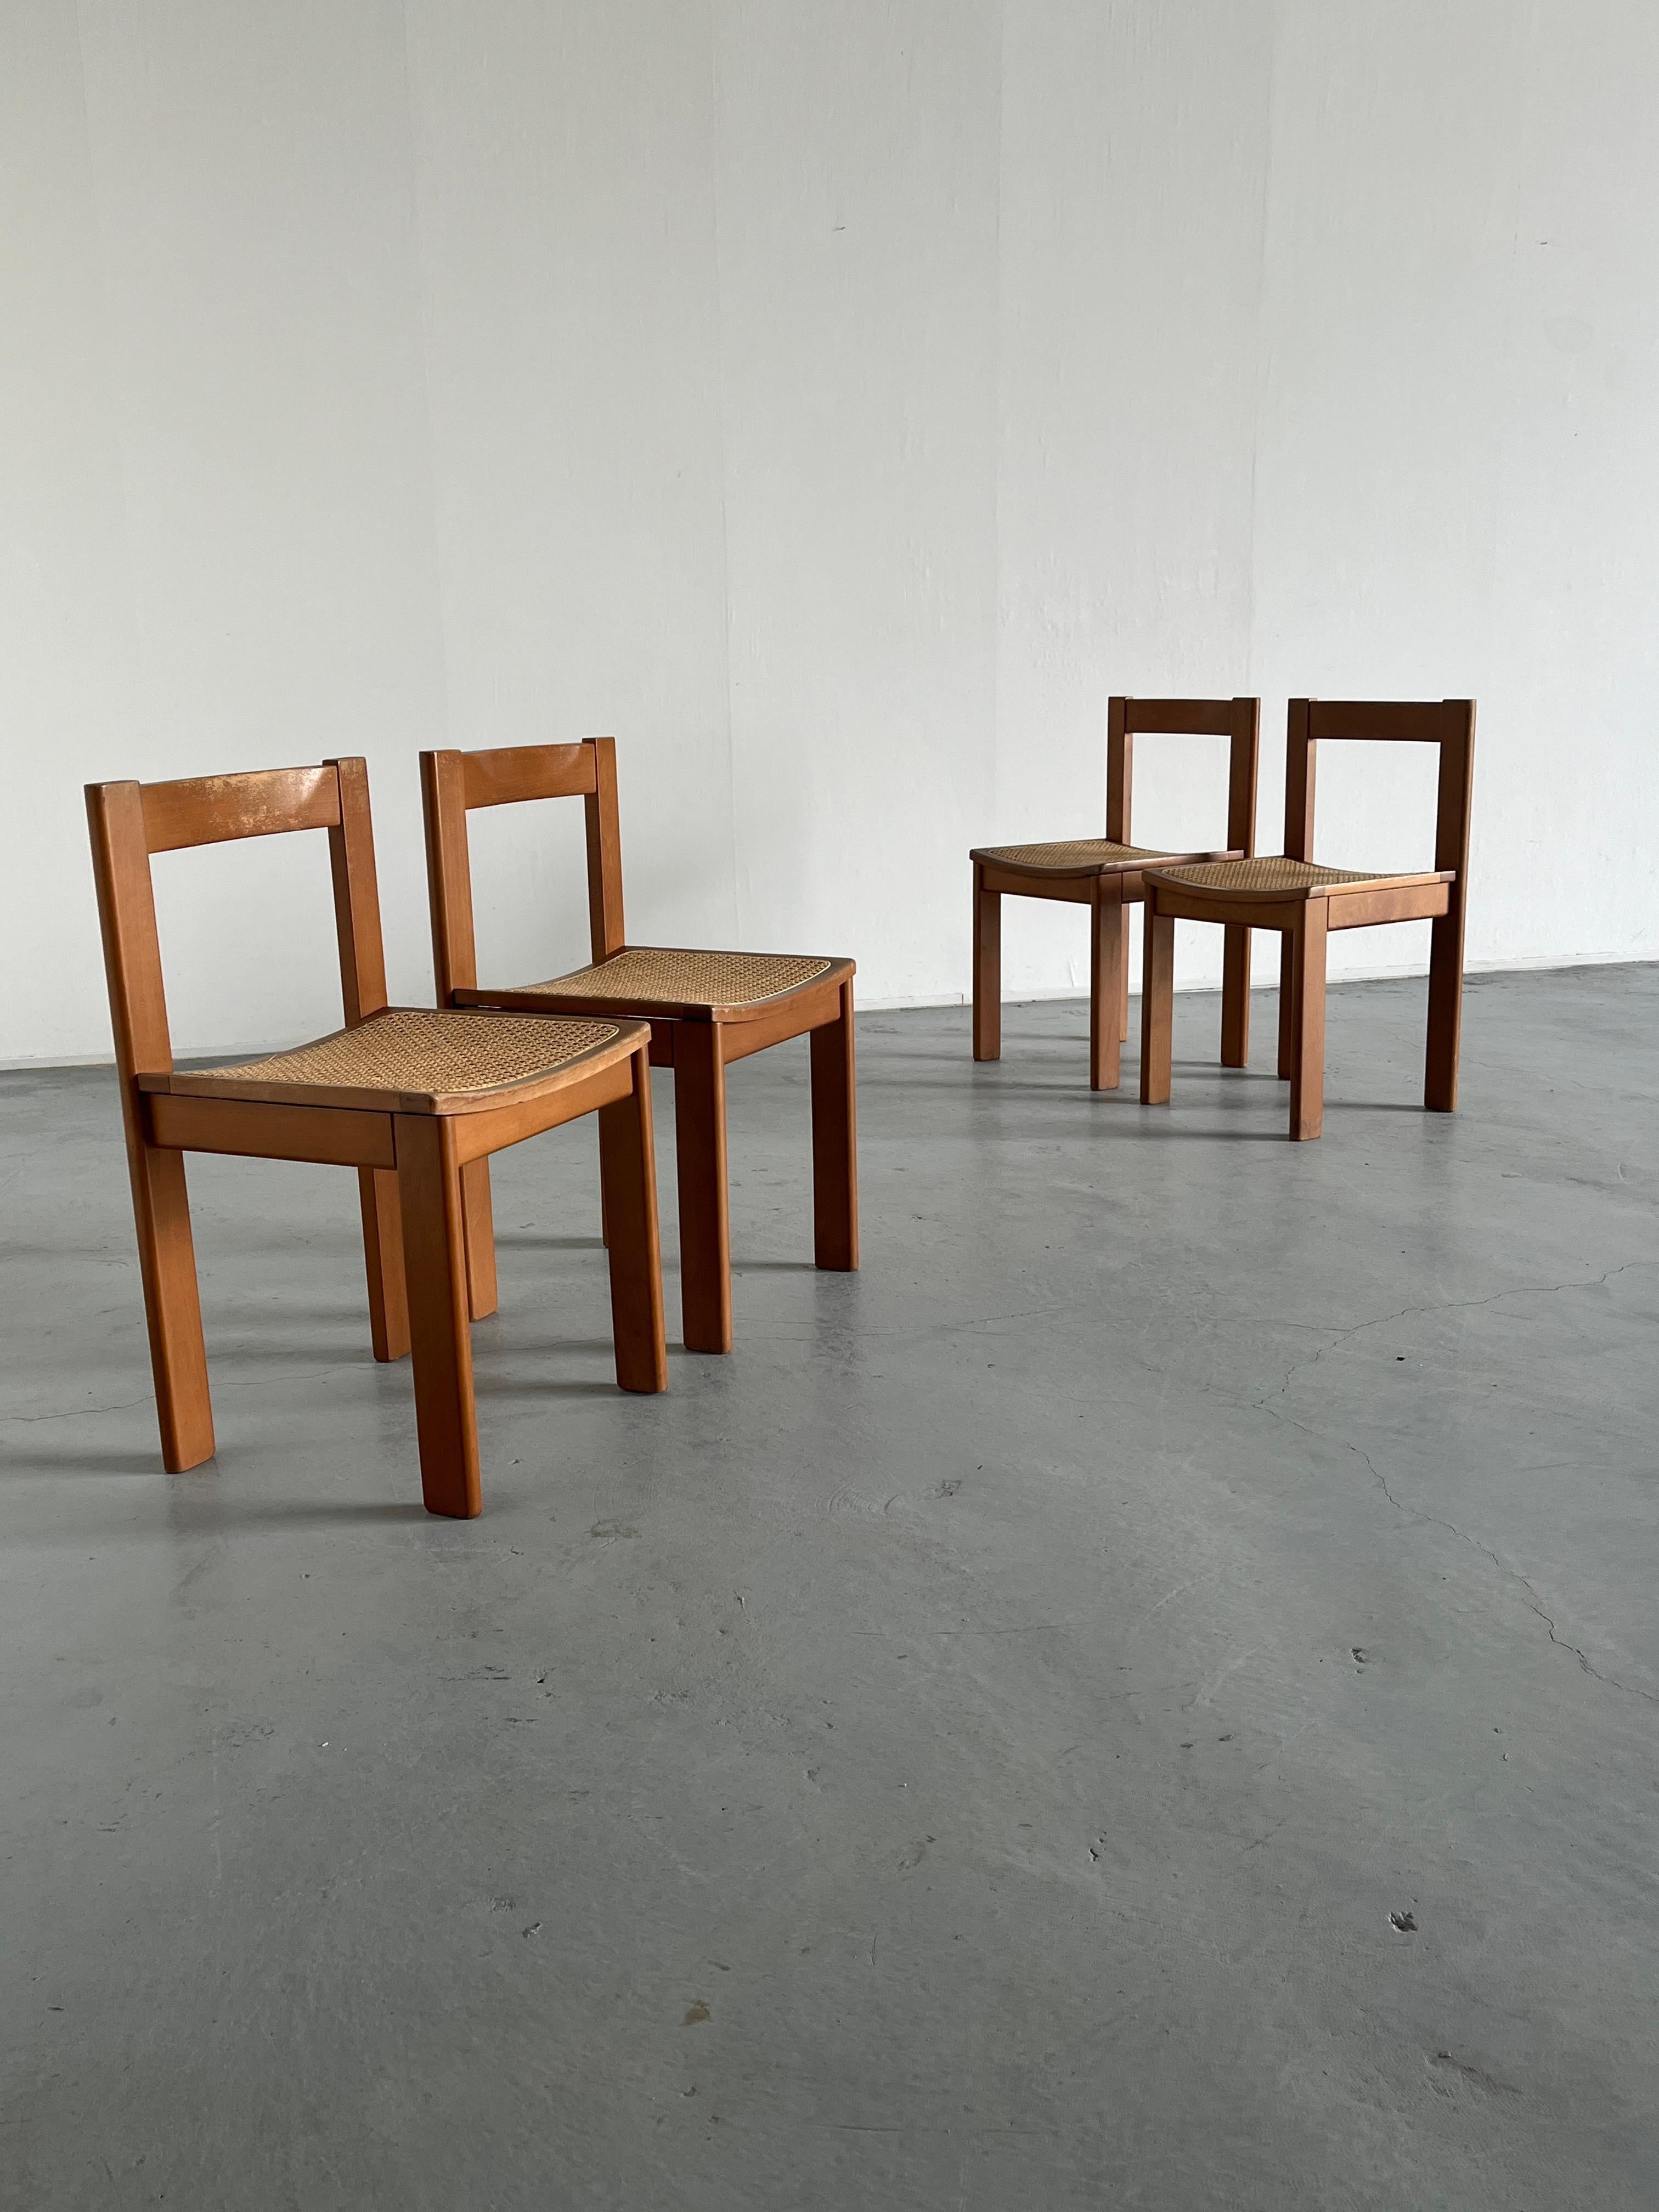 Mid-20th Century Set of 4 Vintage Mid-Century Modern Constructivist Wooden Dining Chairs, 1960s For Sale